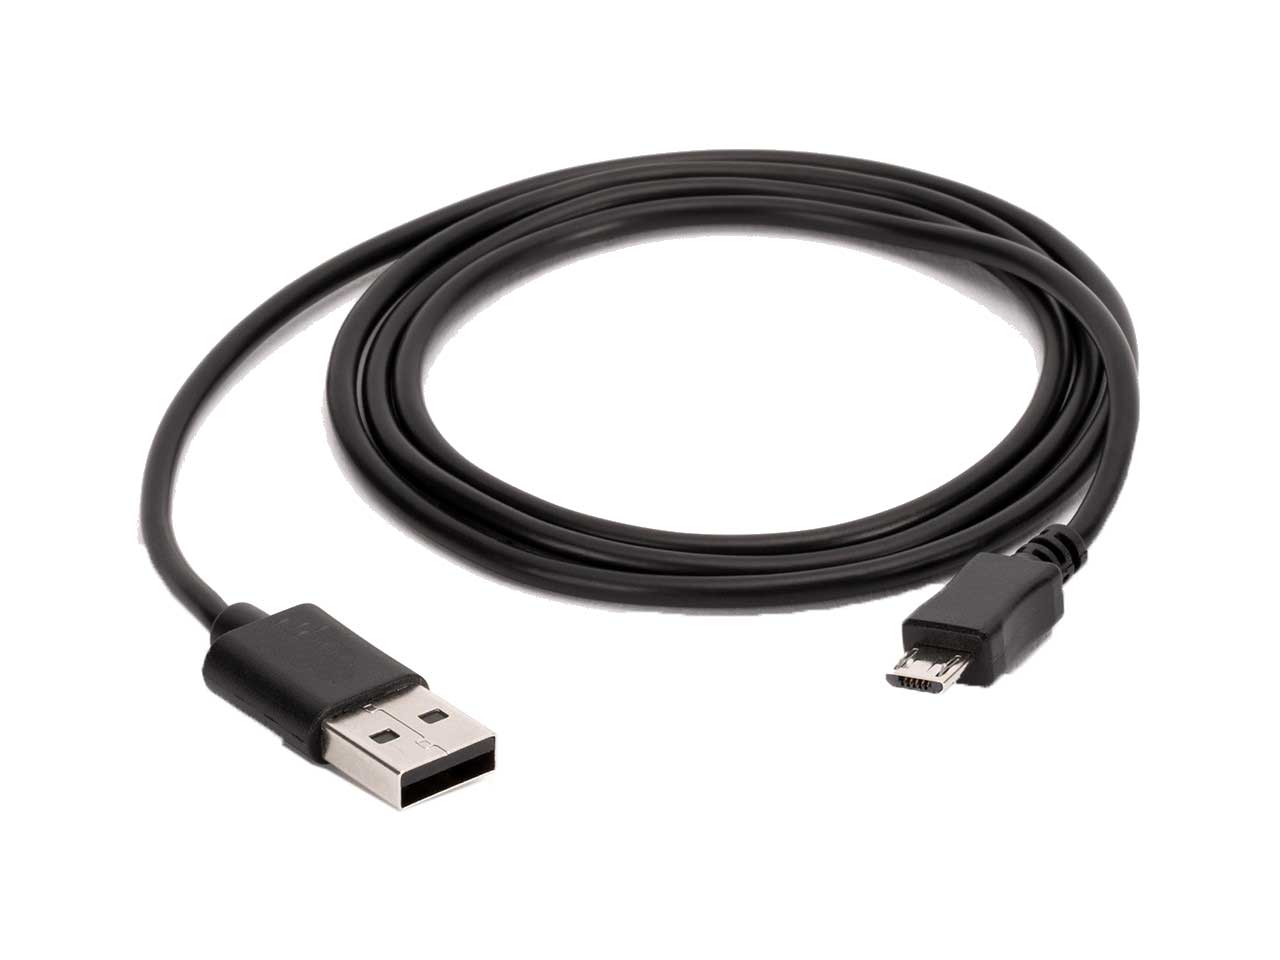 NewSonic SONO2-NG-USB USB Cable for Power Supply and Data Transfer